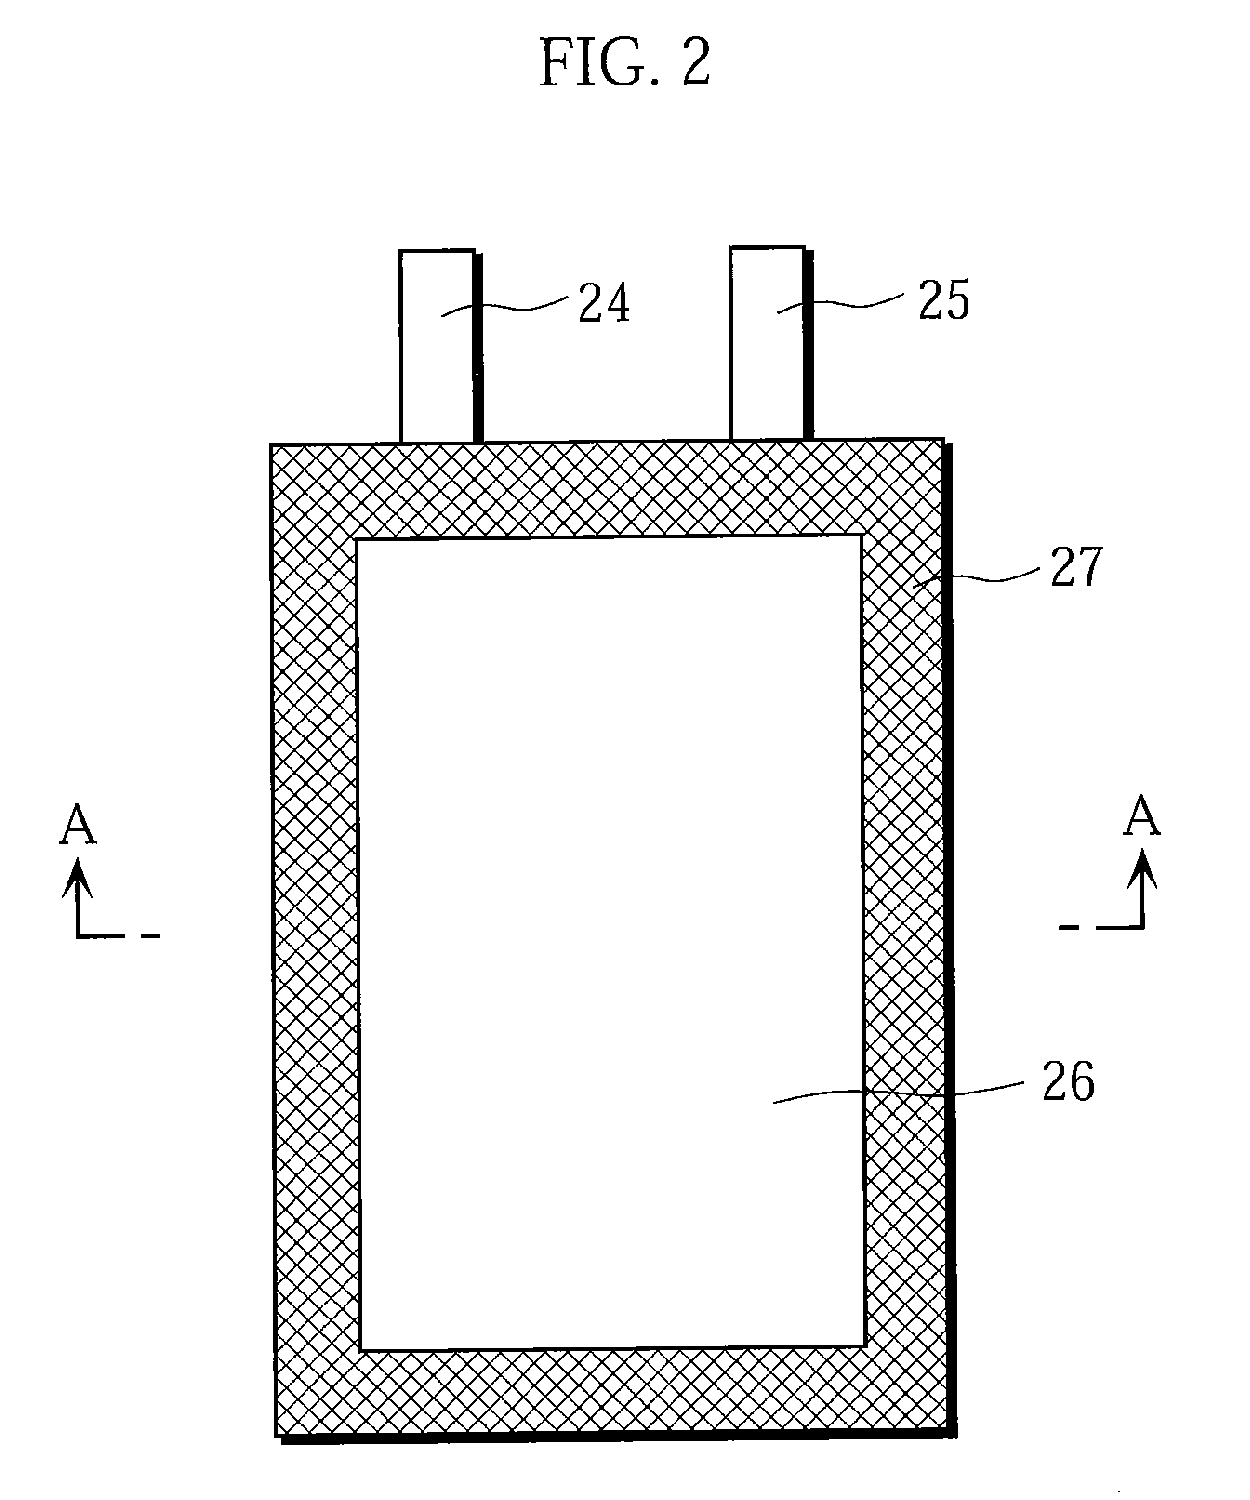 Cylindrical lithium secondary battery